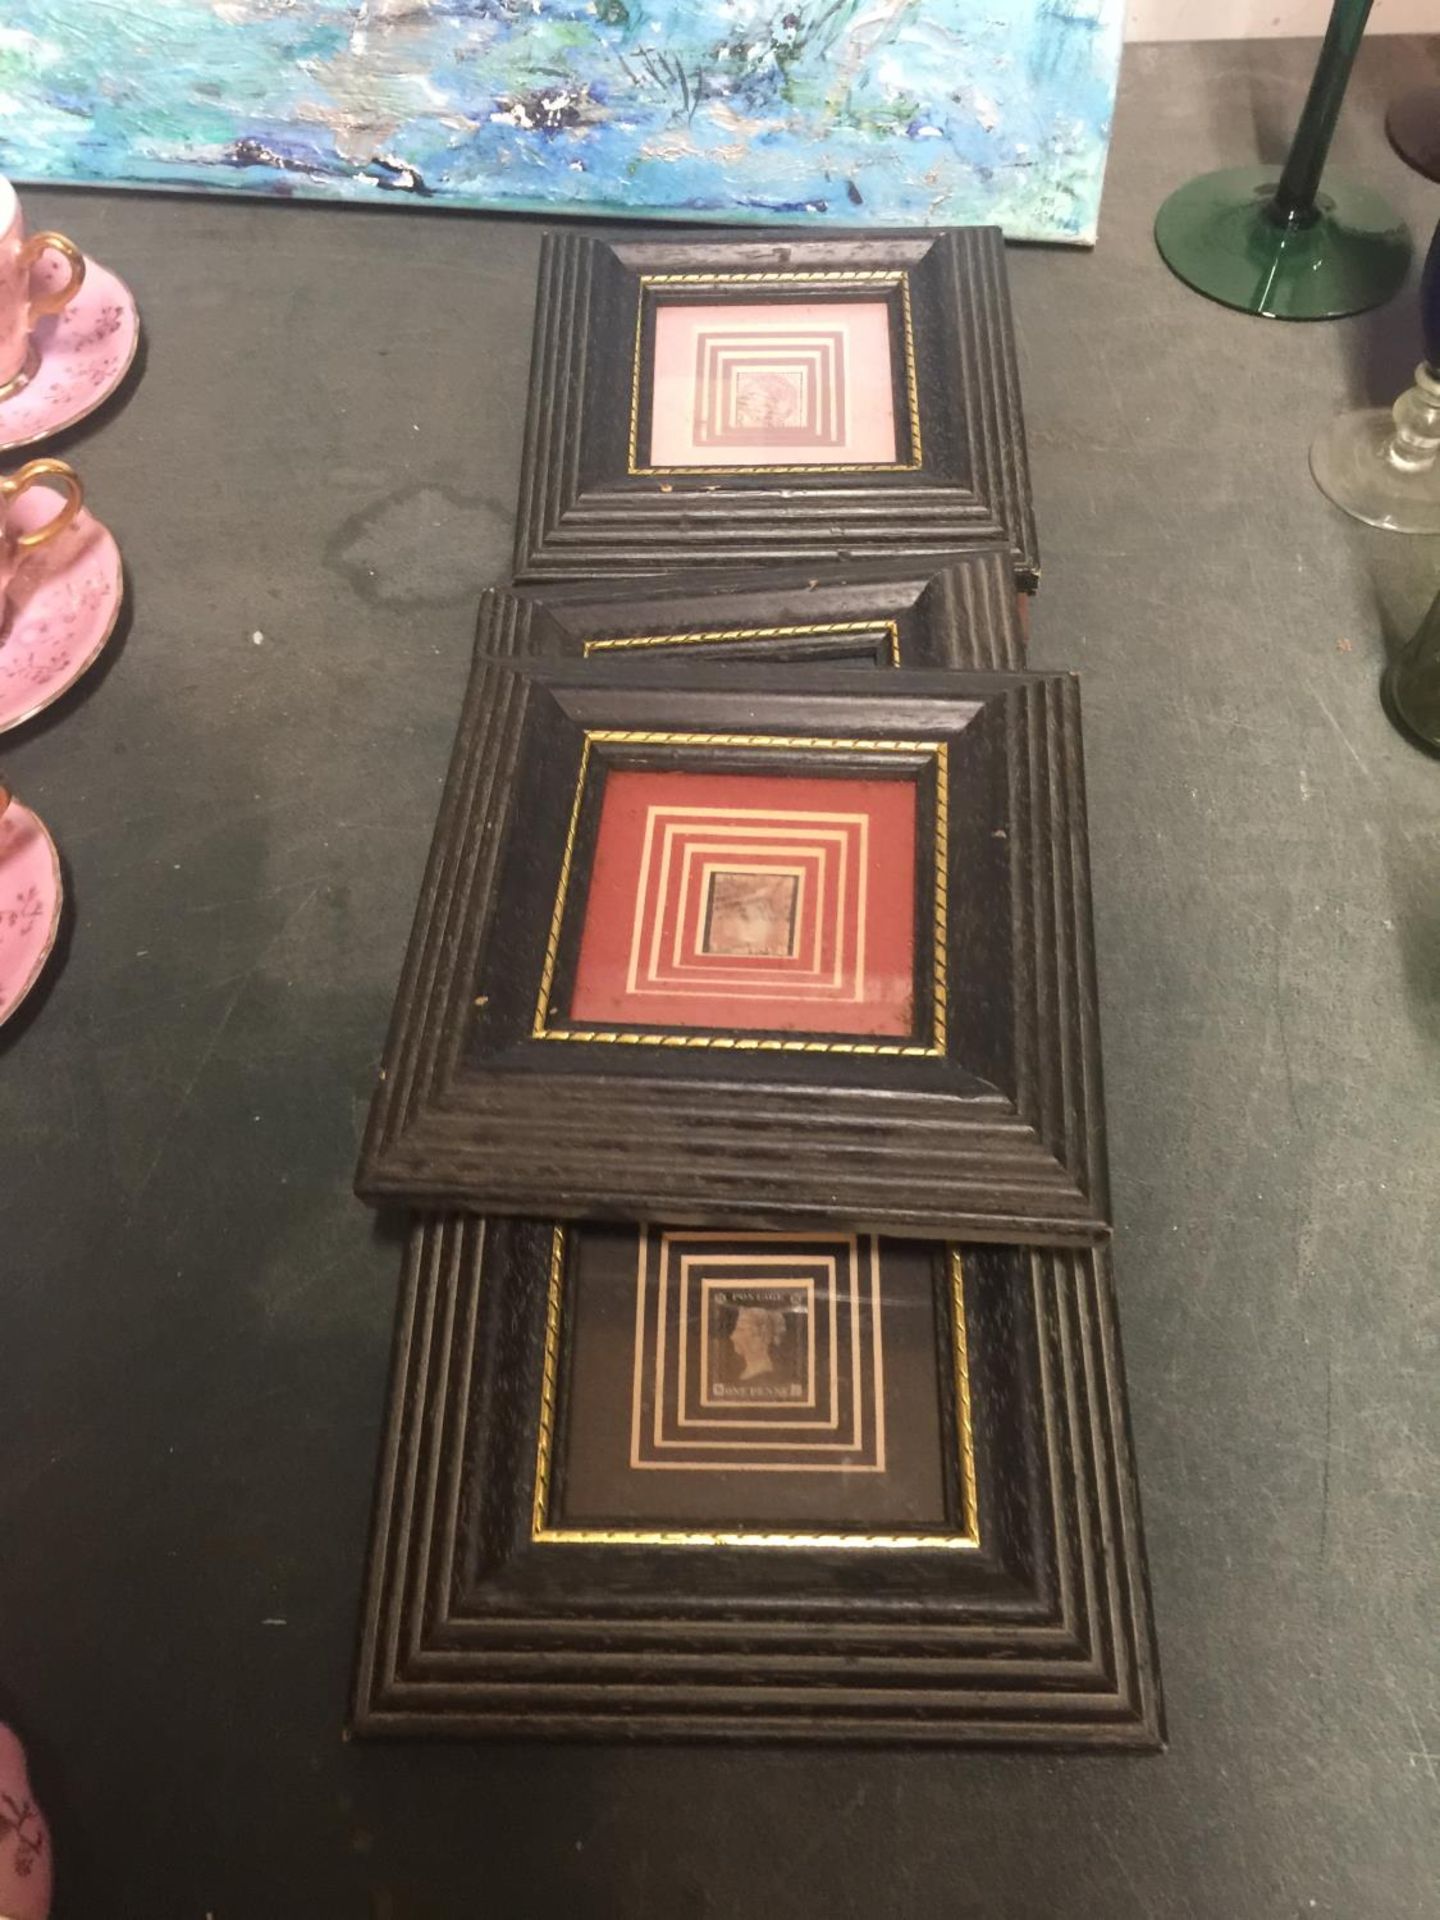 FOUR VINTAGE STAMPS IN FRAMES TO INCLUDE A PENNY BLACK, PENNY RED, TWO PENNY BLUE AND A PENNY PURPLE